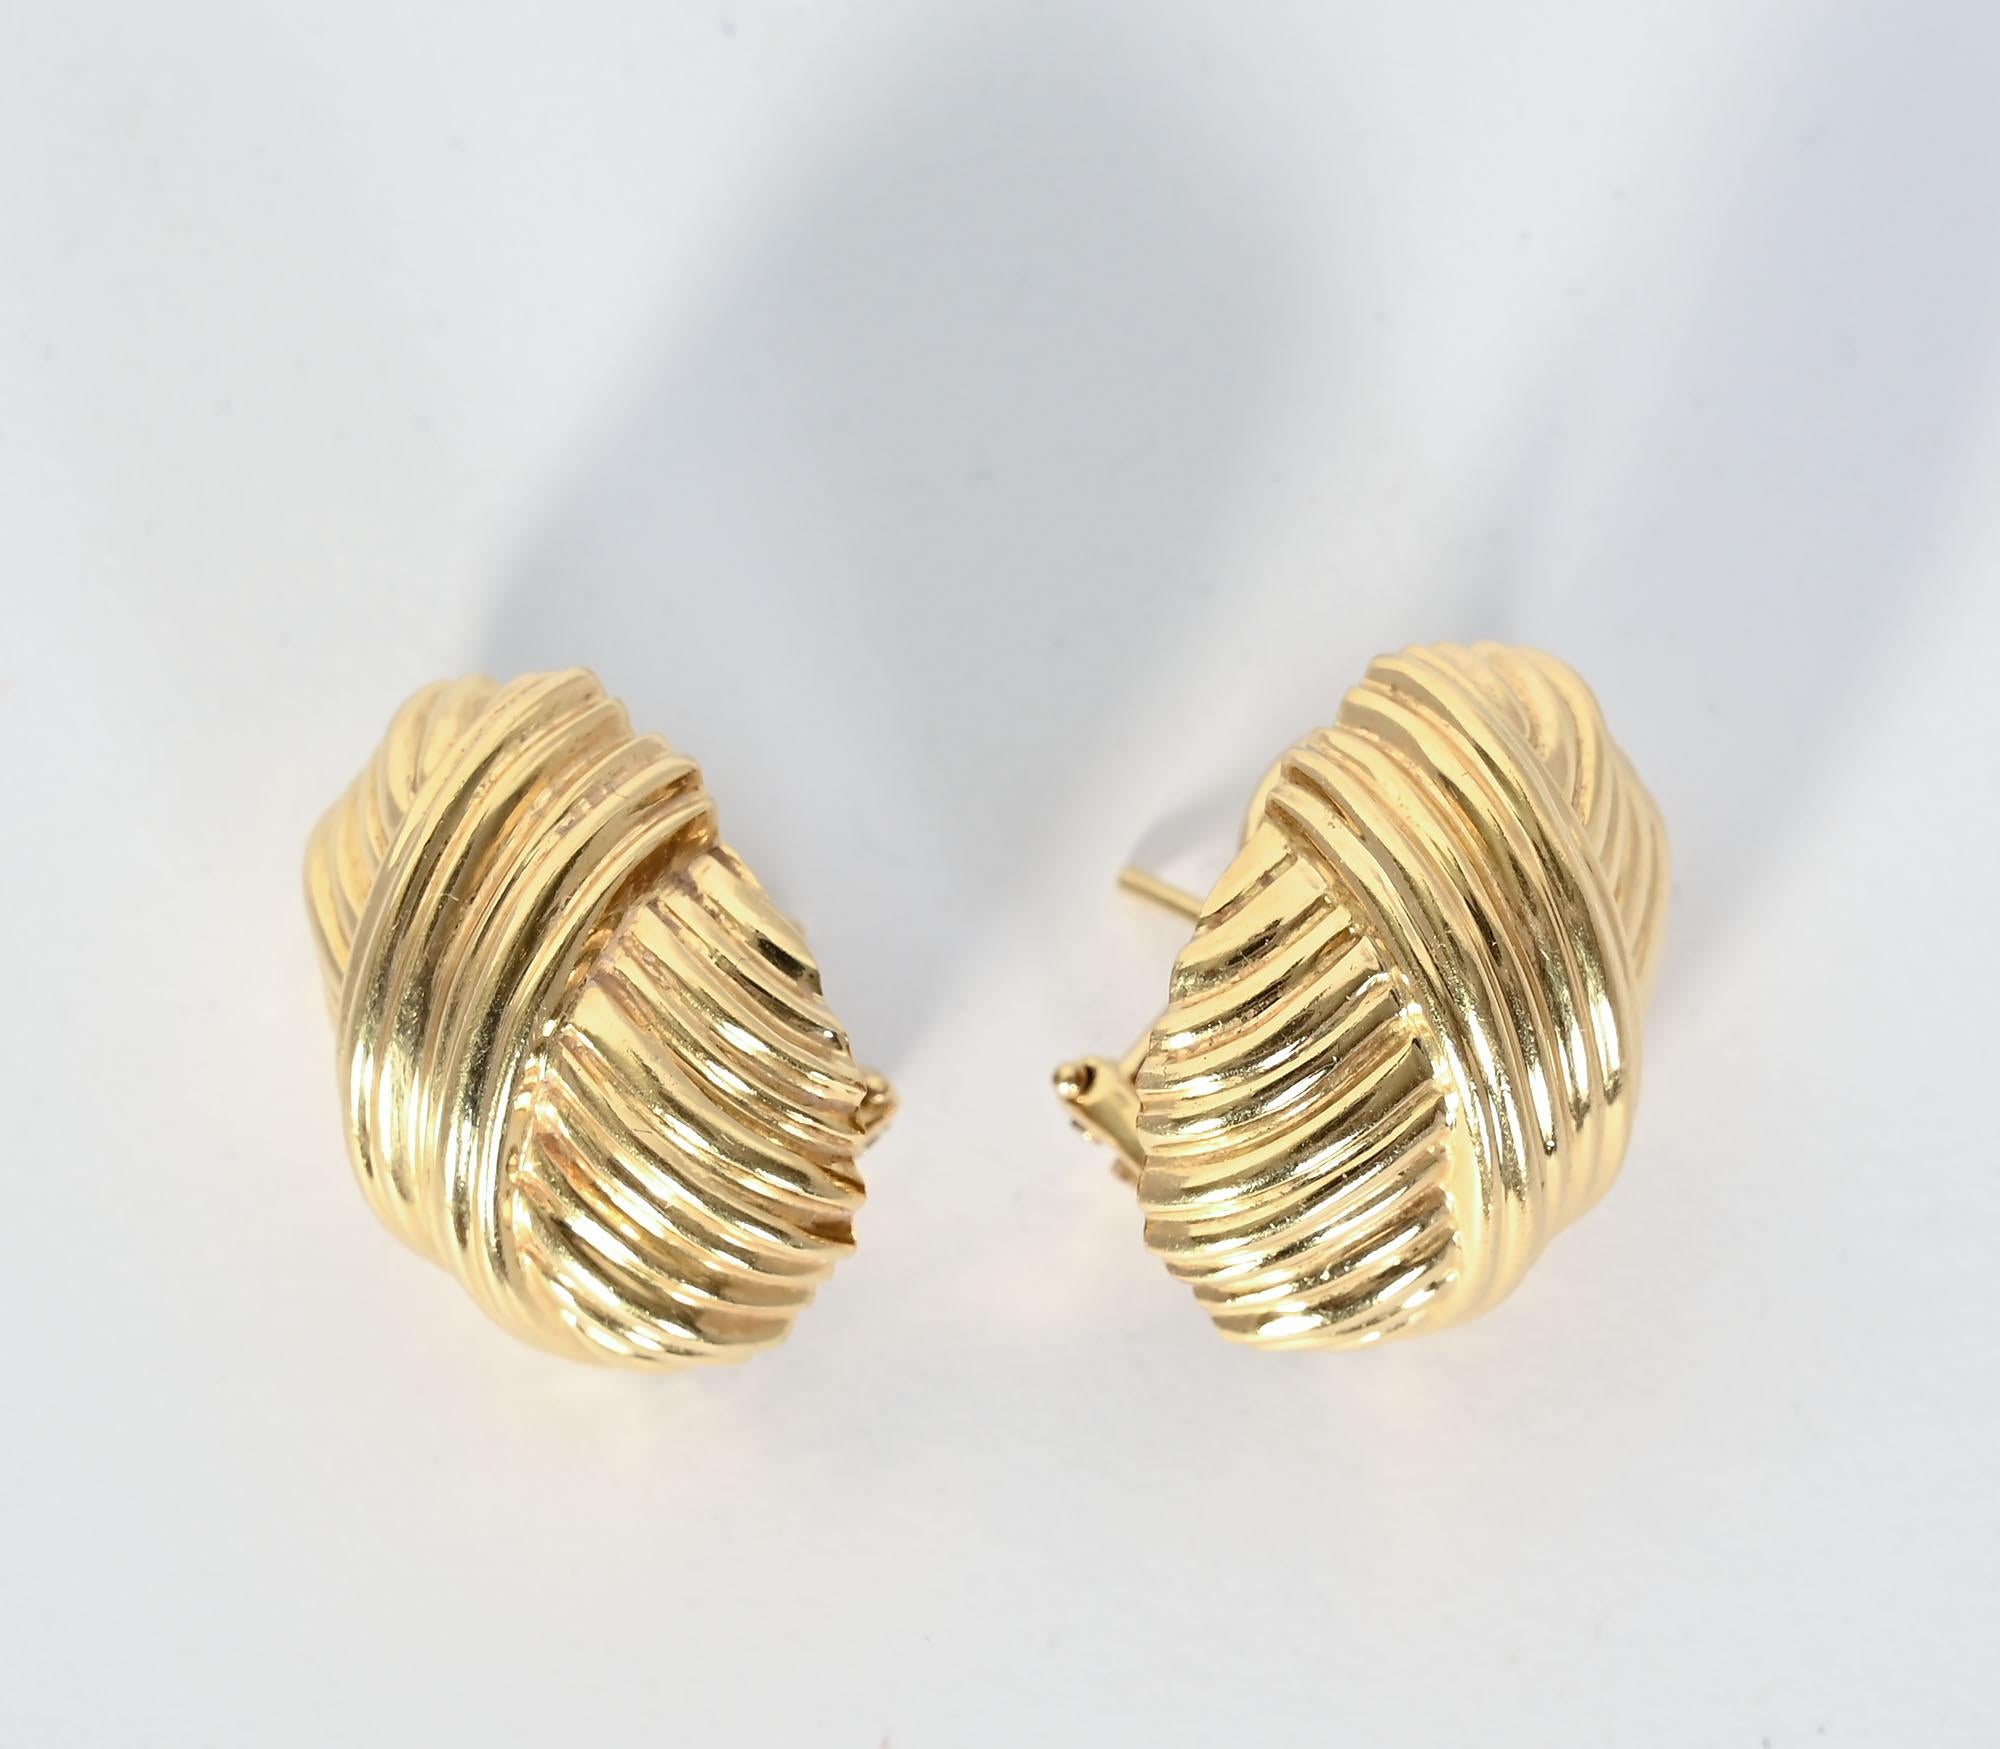 Tailored 18 karat gold earrings by Tiffany. The oval earring has a ribbed surface over which a diagonal of the same texture creates added interest. The earrings are half an inch wide and three quarters of an inch long. Backs are posts and clips.